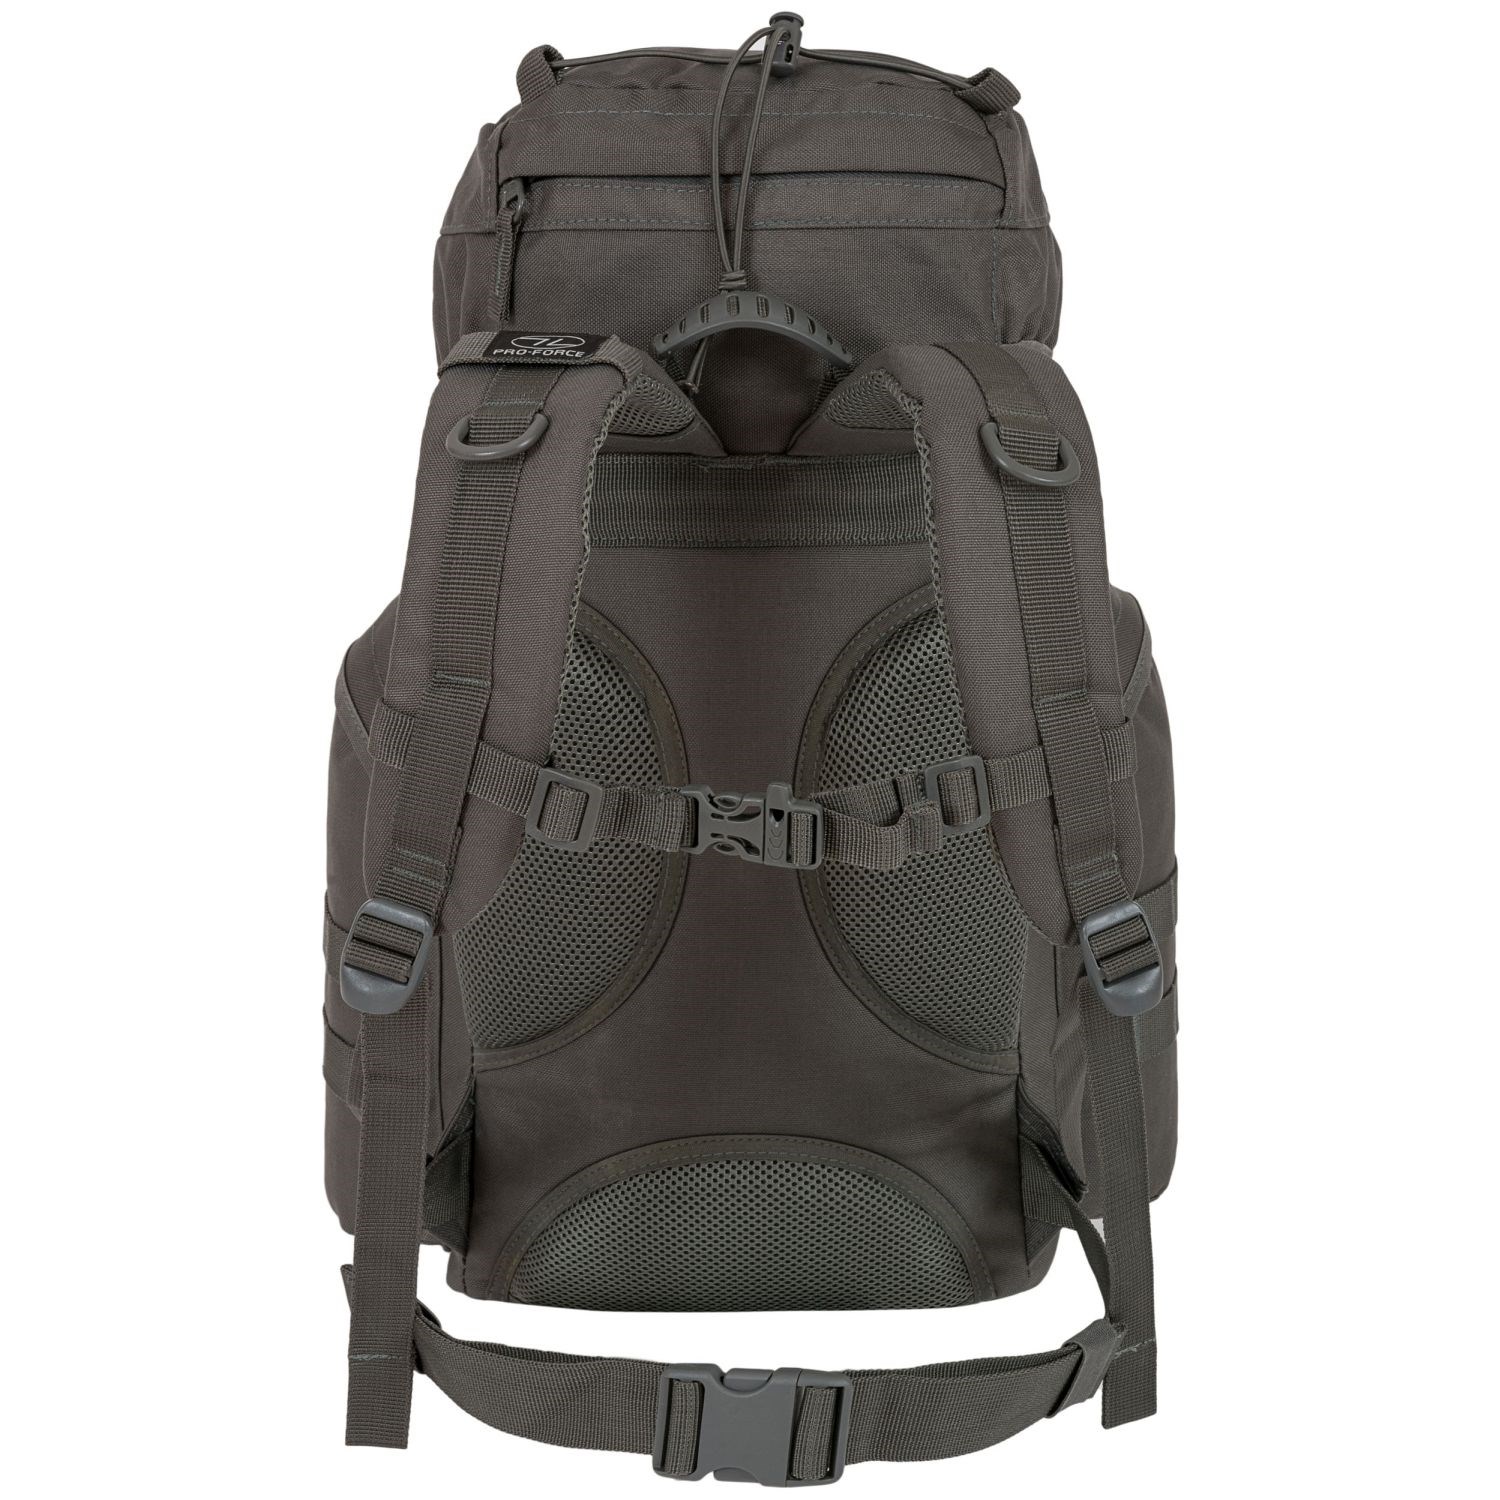 Backpack FORCES 25 GREY PRO-FORCE NRT025-GY L-11